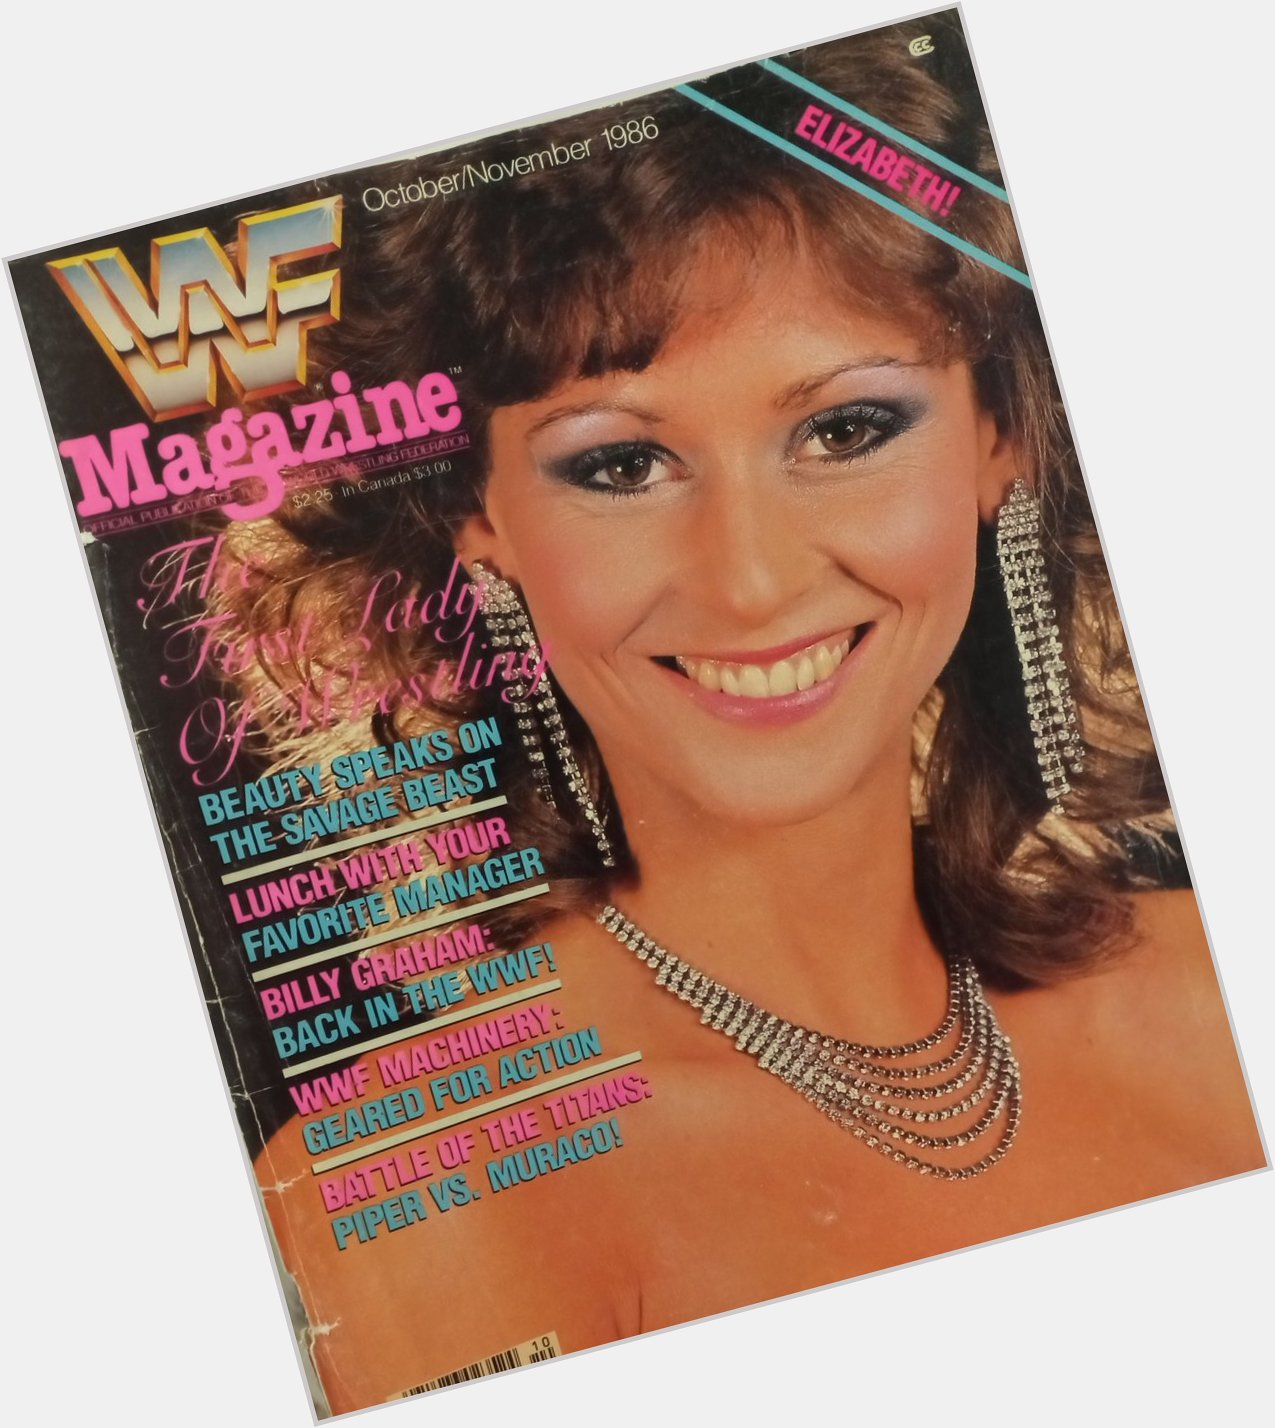 A special Happy Birthday to the sky above to the \"First Lady of Wrestling\":Miss Elizabeth. 